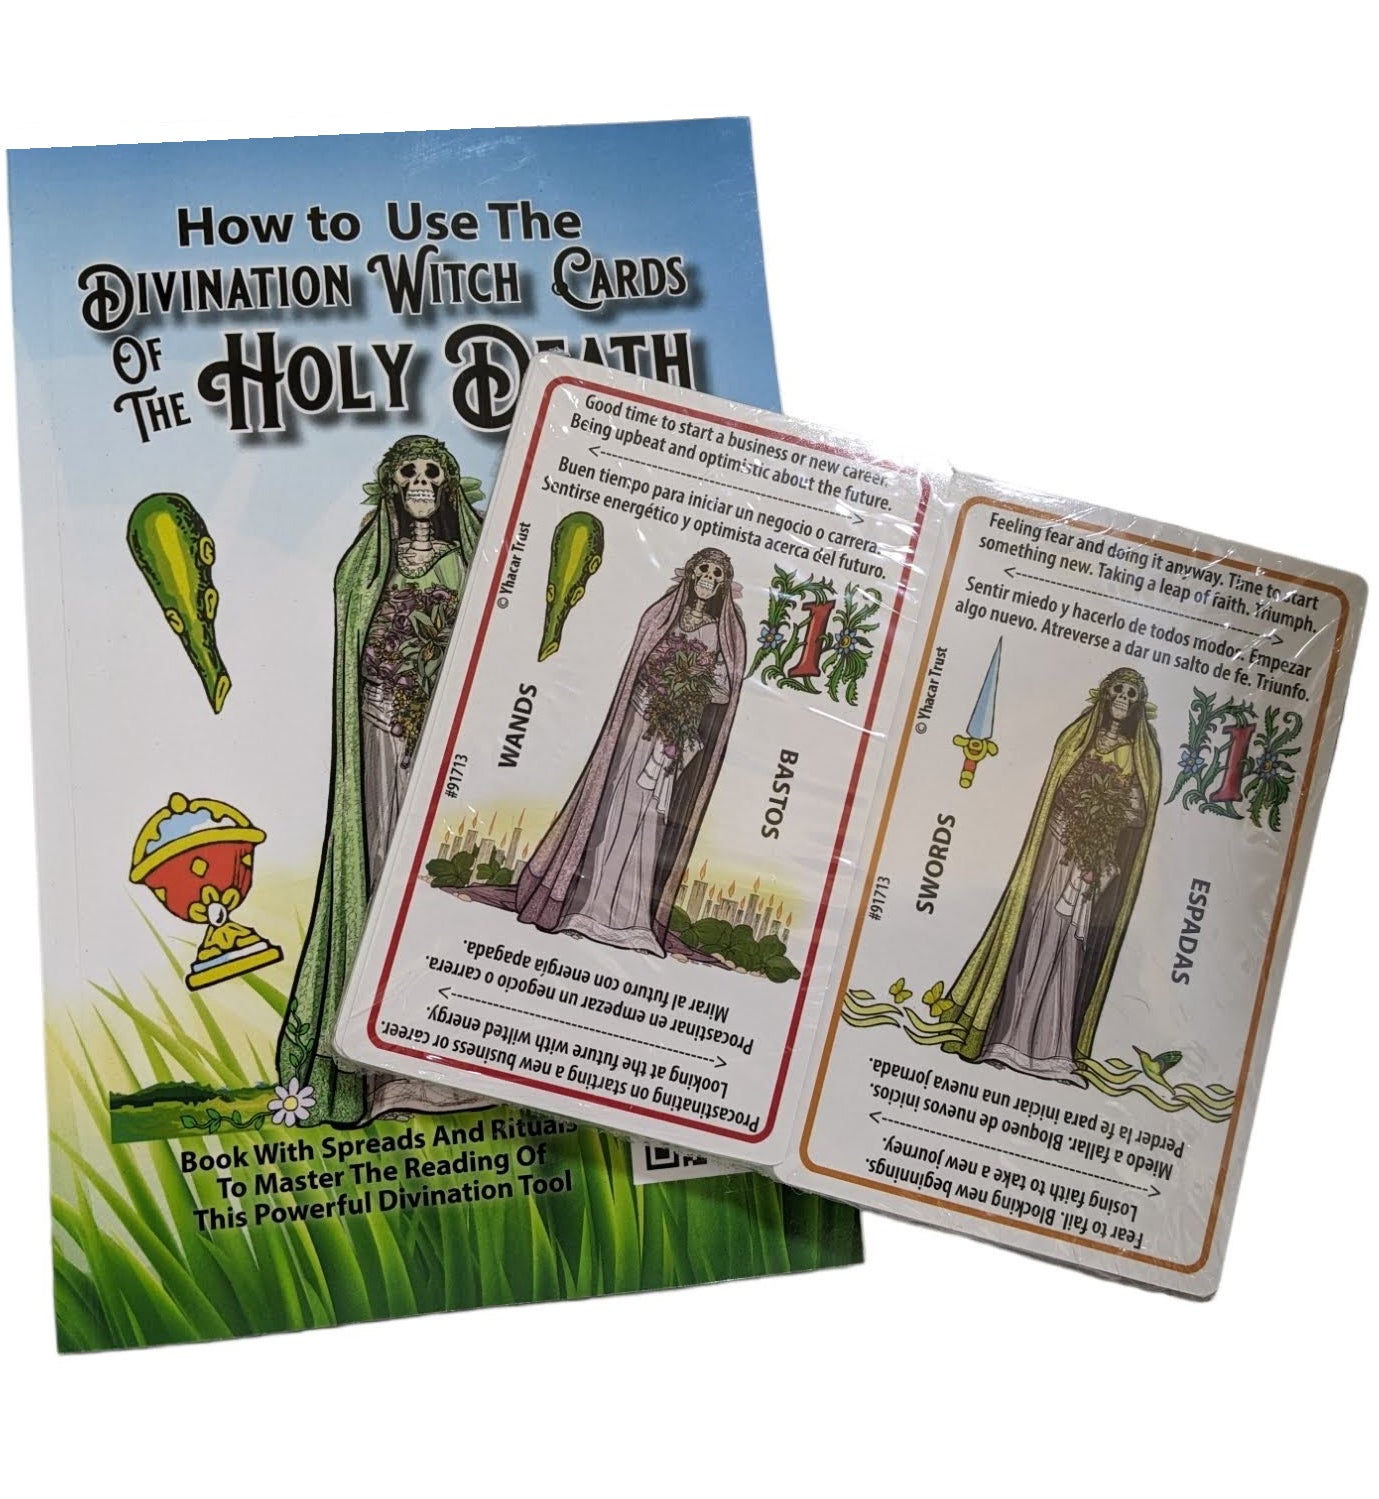 Divination Witch Cards of the Holy Death - Book And 48 Cards With Interpretations And Spreads